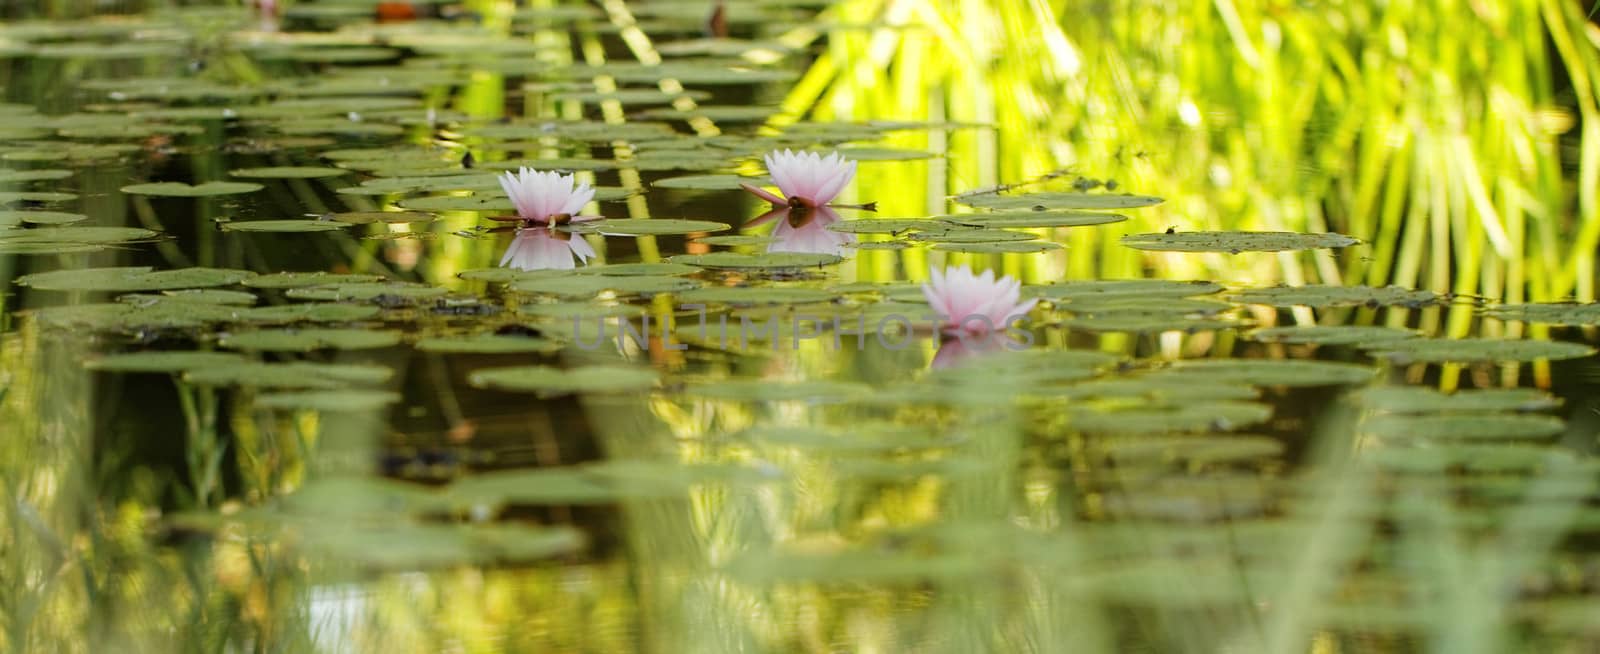 Pink water lily by Nneirda